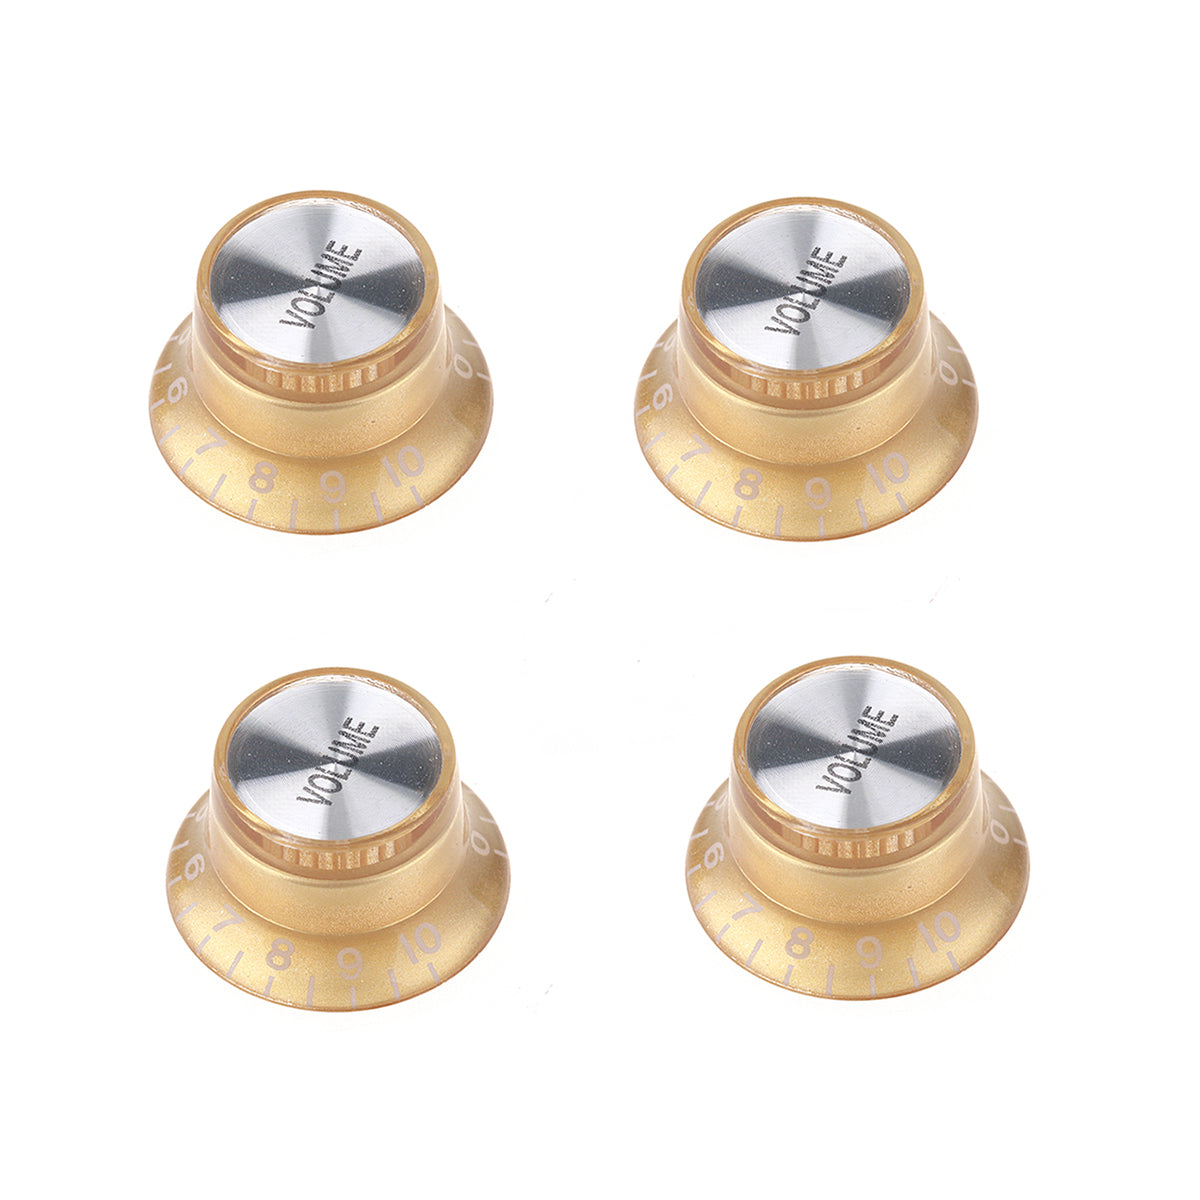 Musiclily Metric 6mm LP Style Guitar Speed Volume Control Knobs,Gold ( 4 Pieces)